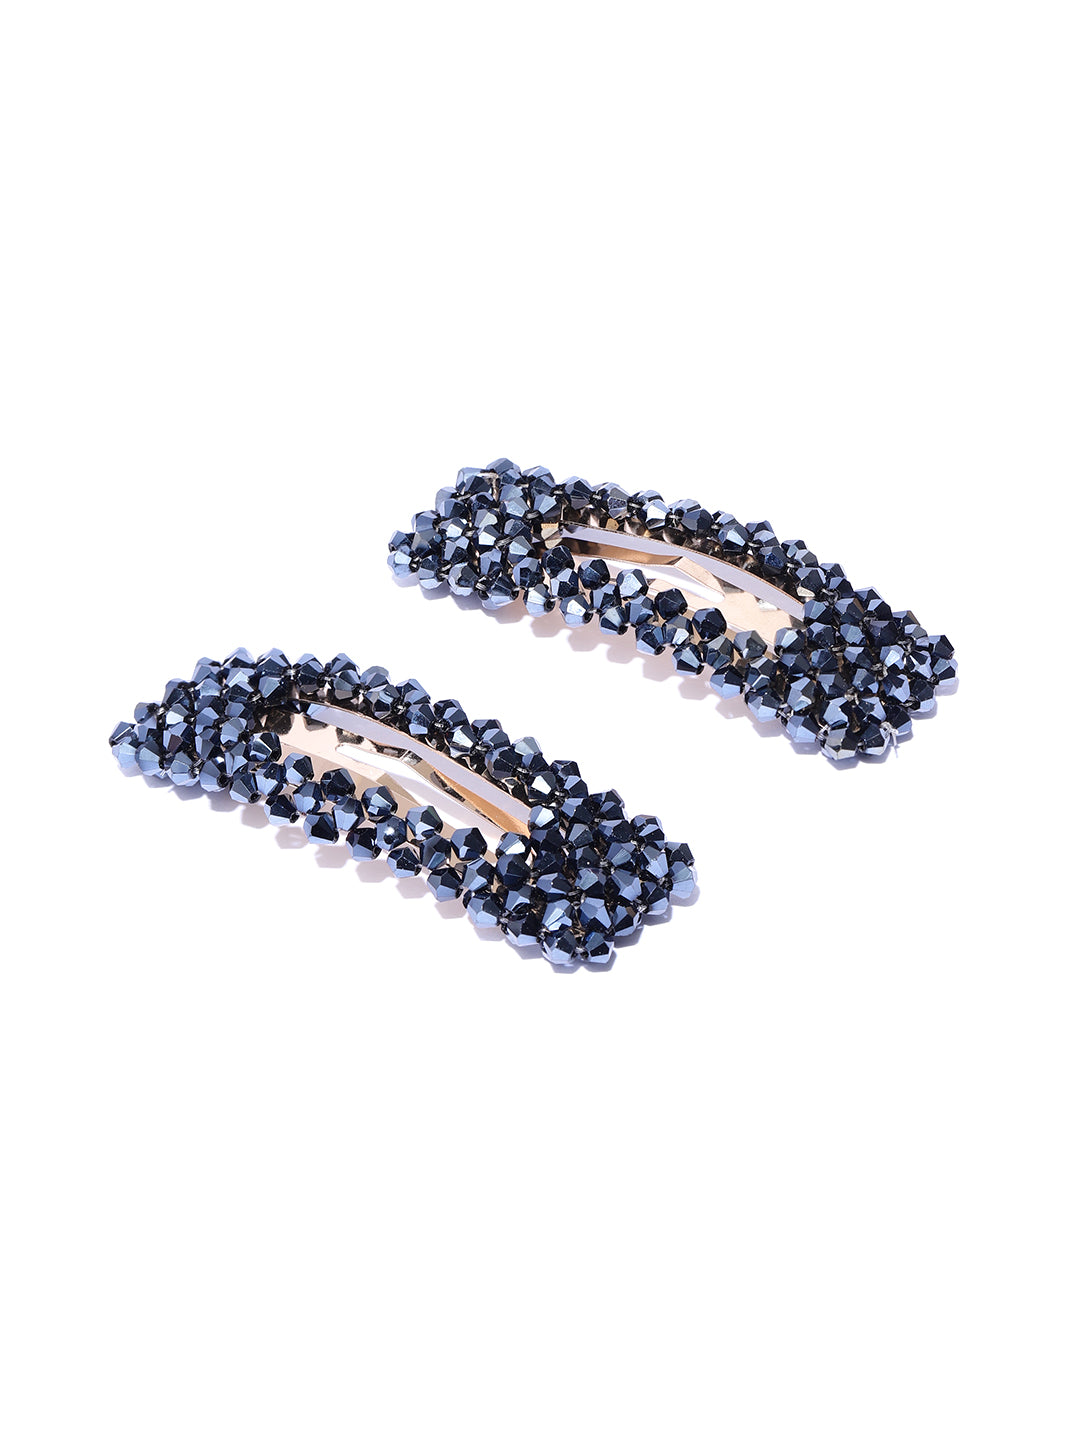 Blueberry set of 2 navy blue crystal beads detailing hair pins